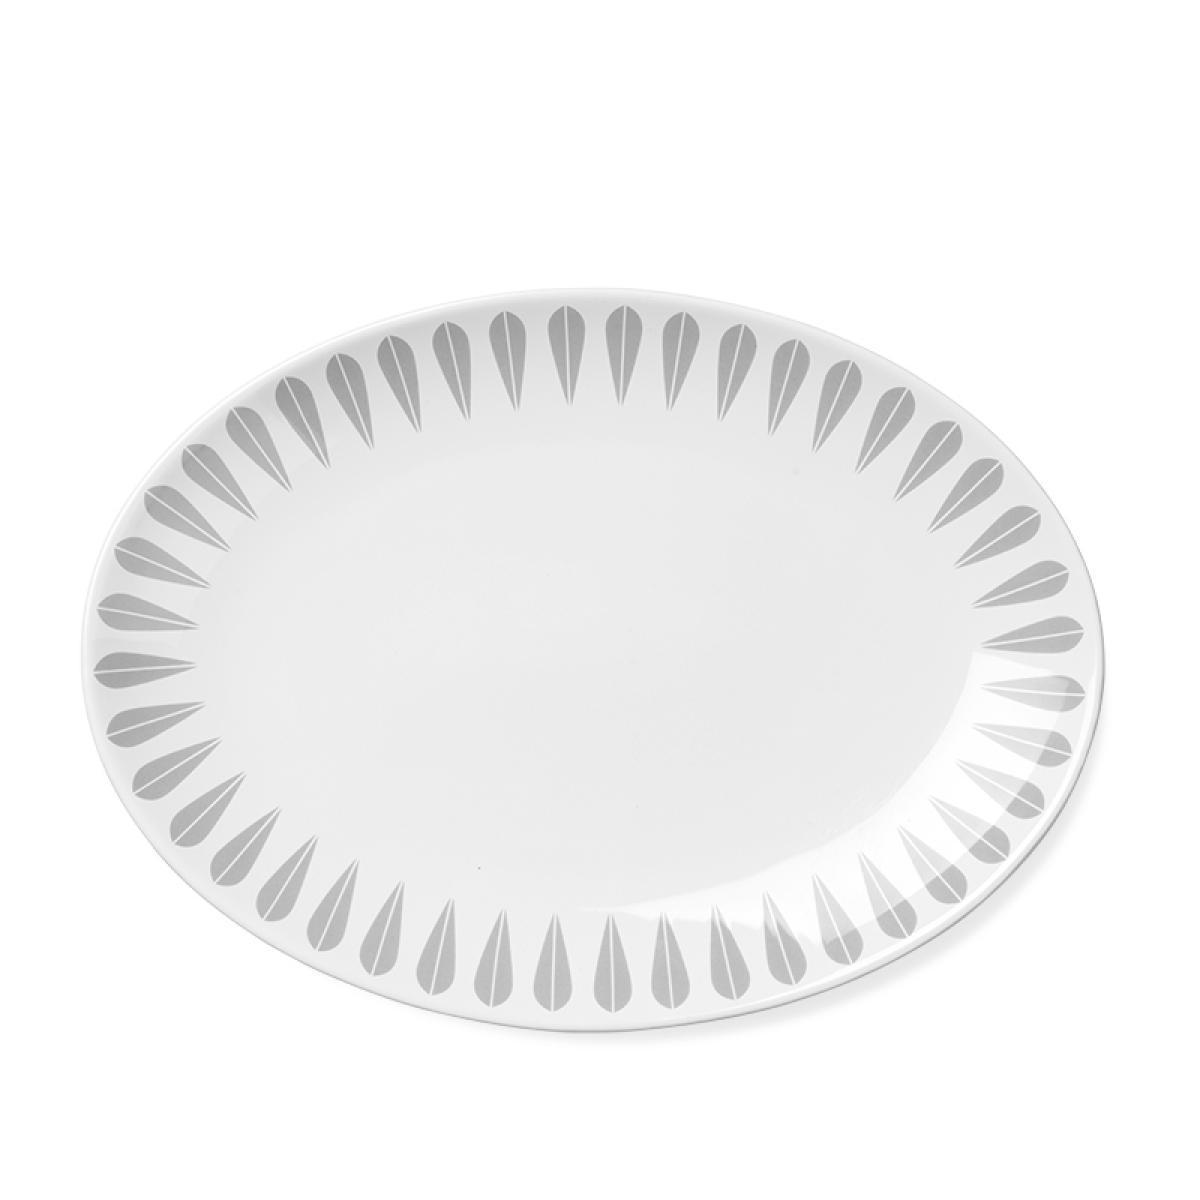 Lucie Kaas Arne Clausen Collection Serving Plate Grey, 34cm